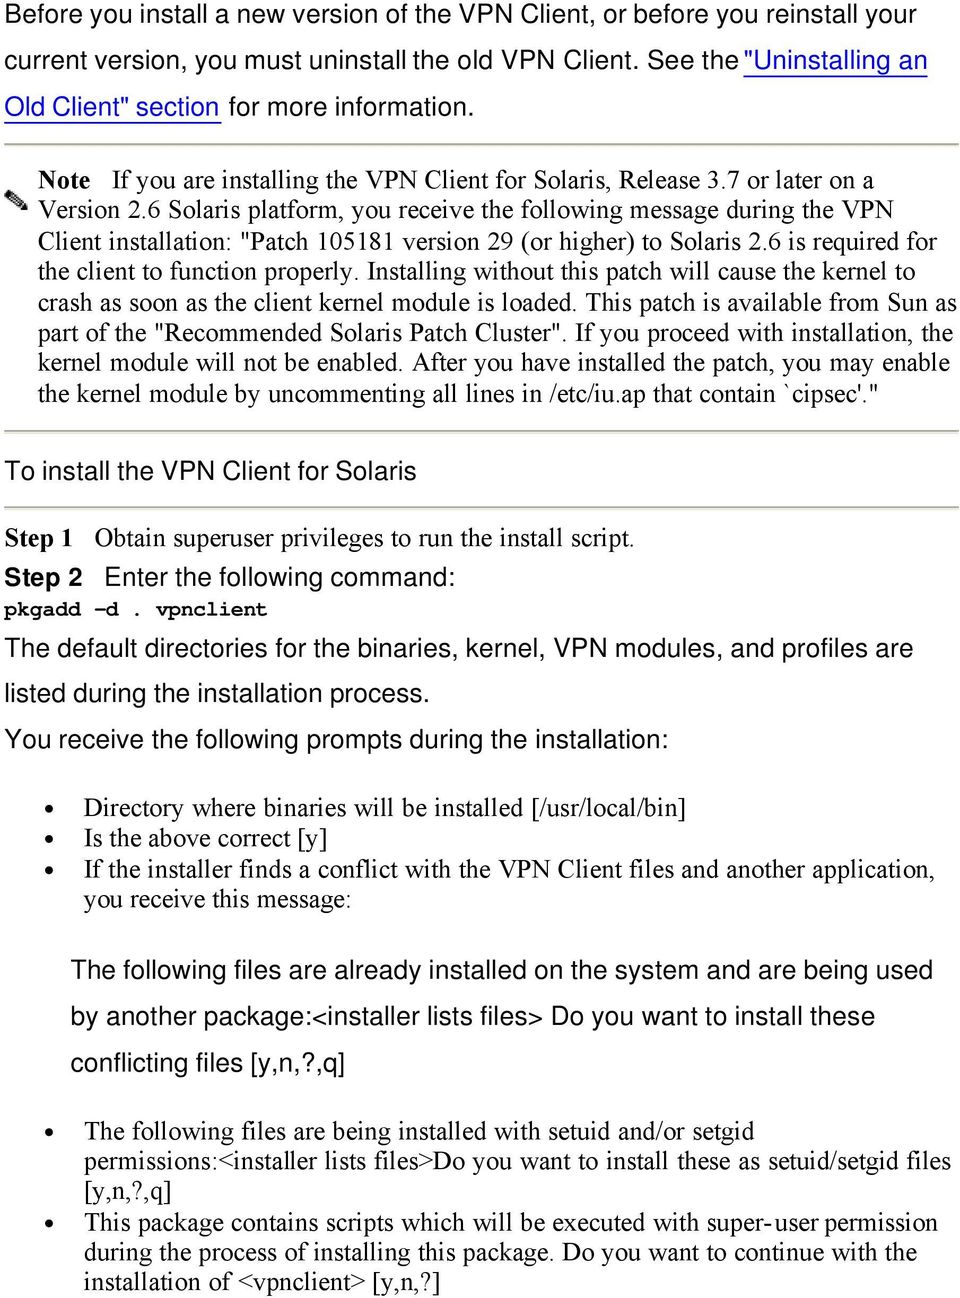 6 Solaris platform, you receive the following message during the VPN Client installation: "Patch 105181 version 29 (or higher) to Solaris 2.6 is required for the client to function properly.